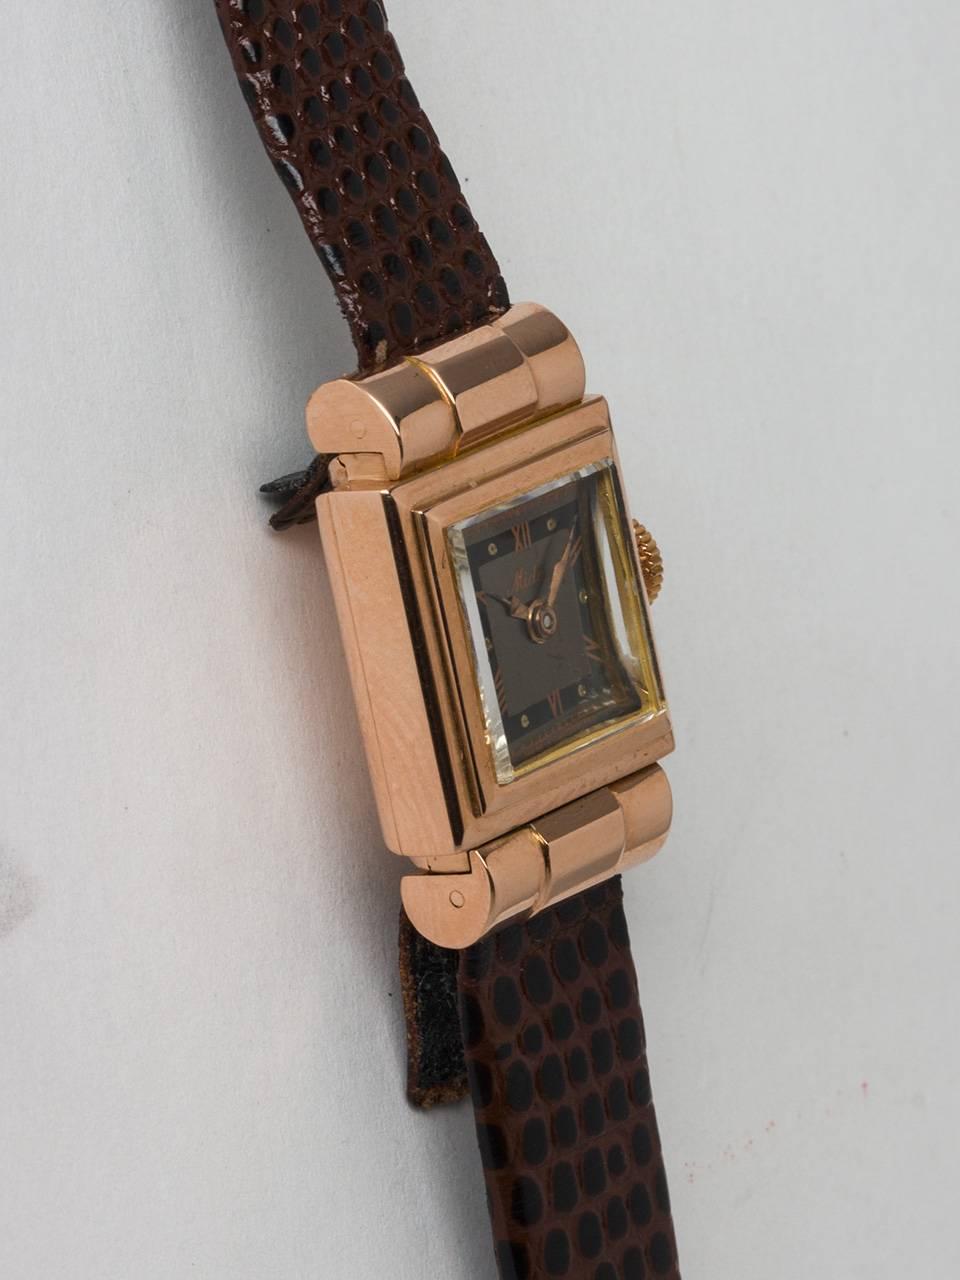 Mido 18K Rose Gold Lady’s Square Dress Model circa 1940s. 15.5 x 25mm square stepped case with barrel lugs and acrylic crystal.Lovely grey and black dial with printed pink roman numerals and applied hands. Powered by manual wind movement. Offered on